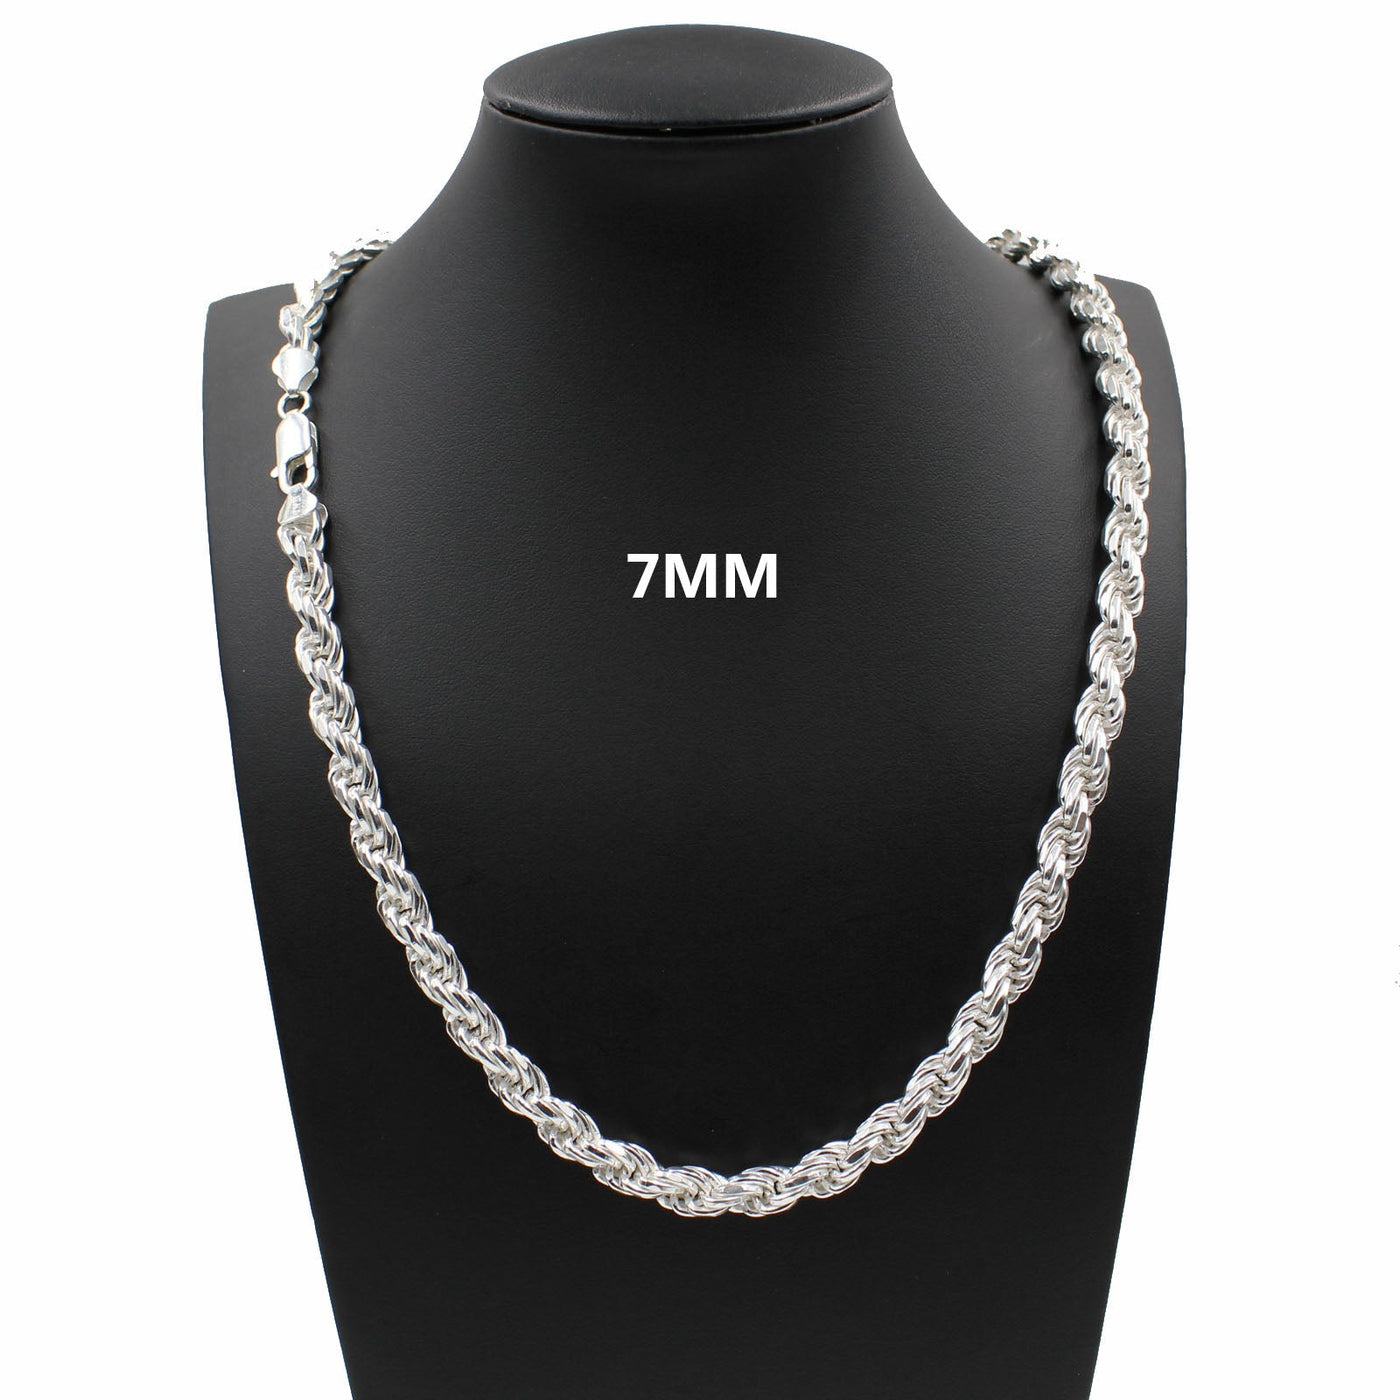 7MM Solid 925 Sterling Silver DIAMOND CUT ROPE CHAIN Necklace ITALY Men Women